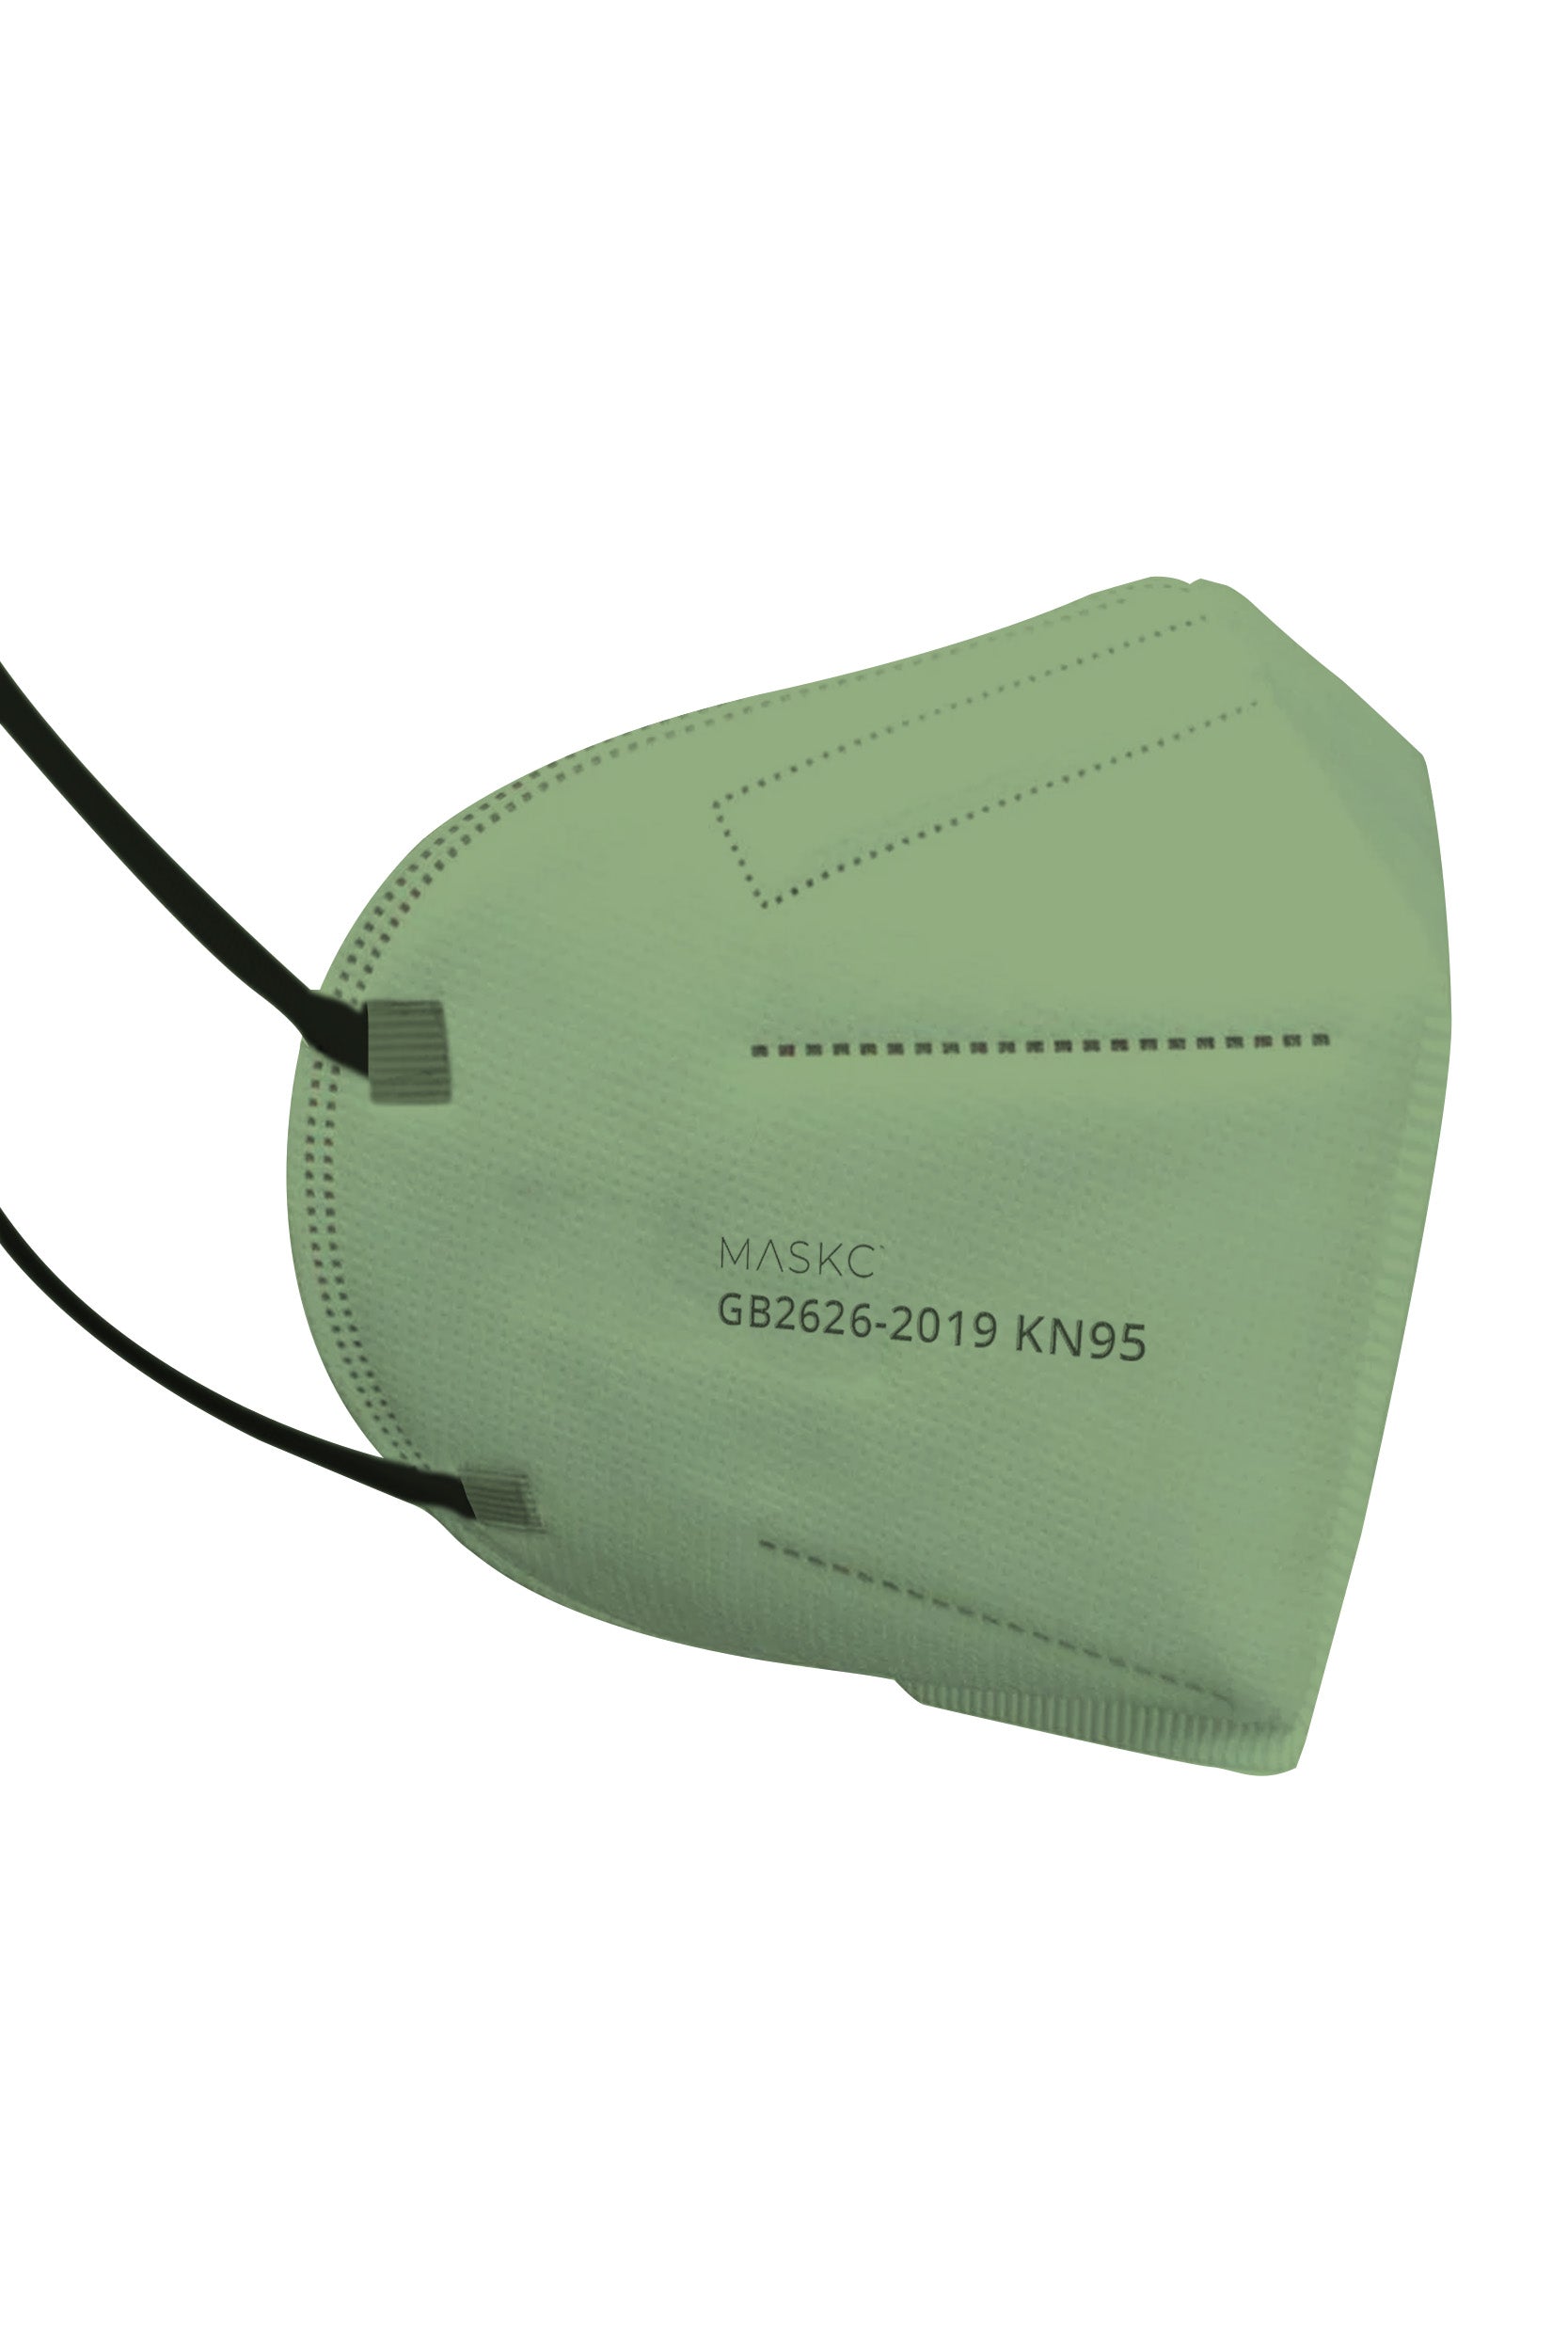 Stylish green KN95 face mask, with soft black ear loops and high quality fabric. 